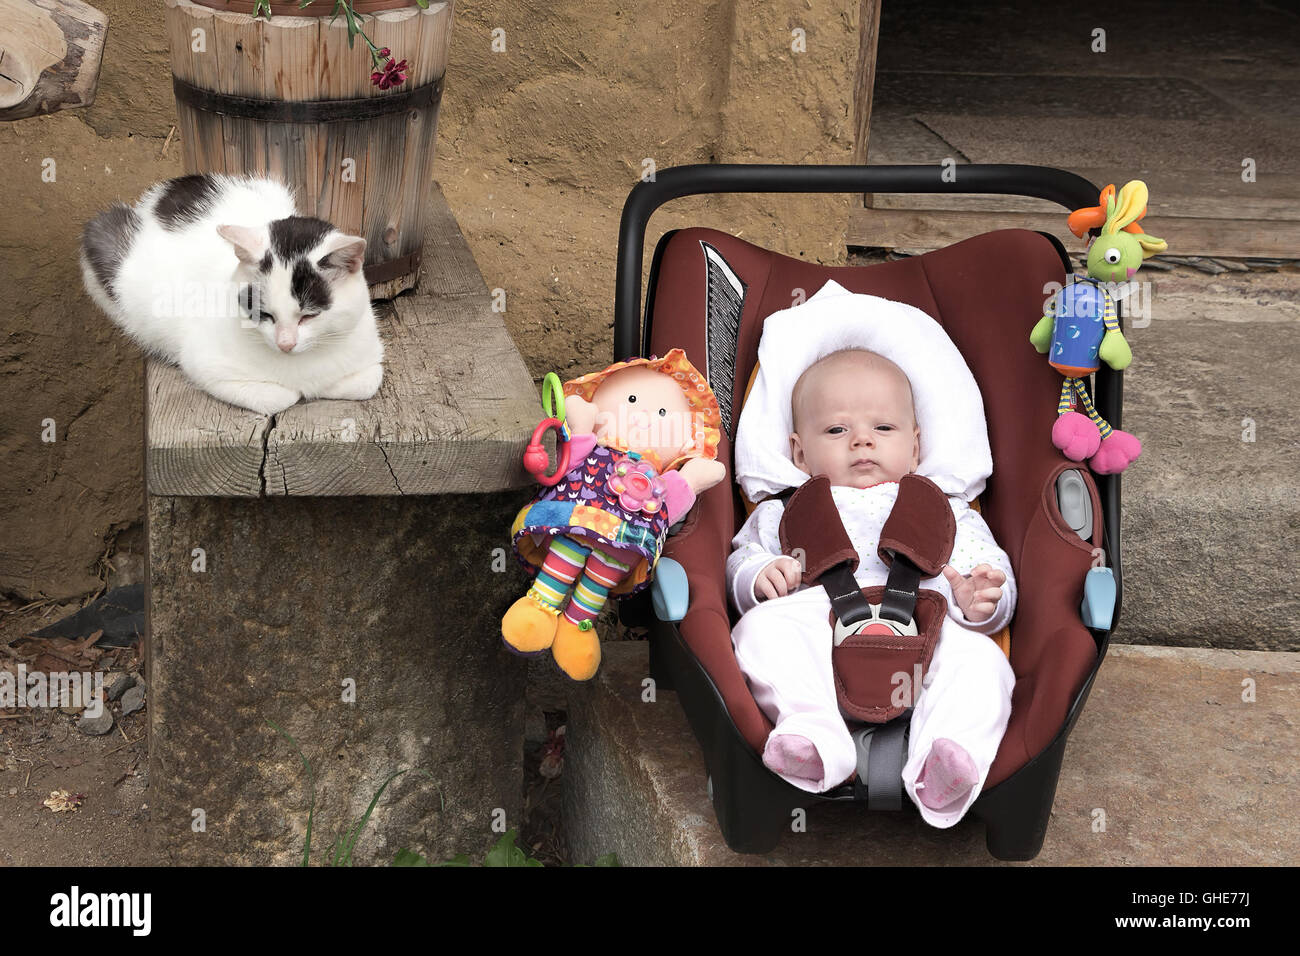 Young baby, infant in a baby car seat on a doorstep of old country vintage house with a cat. Stock Photo